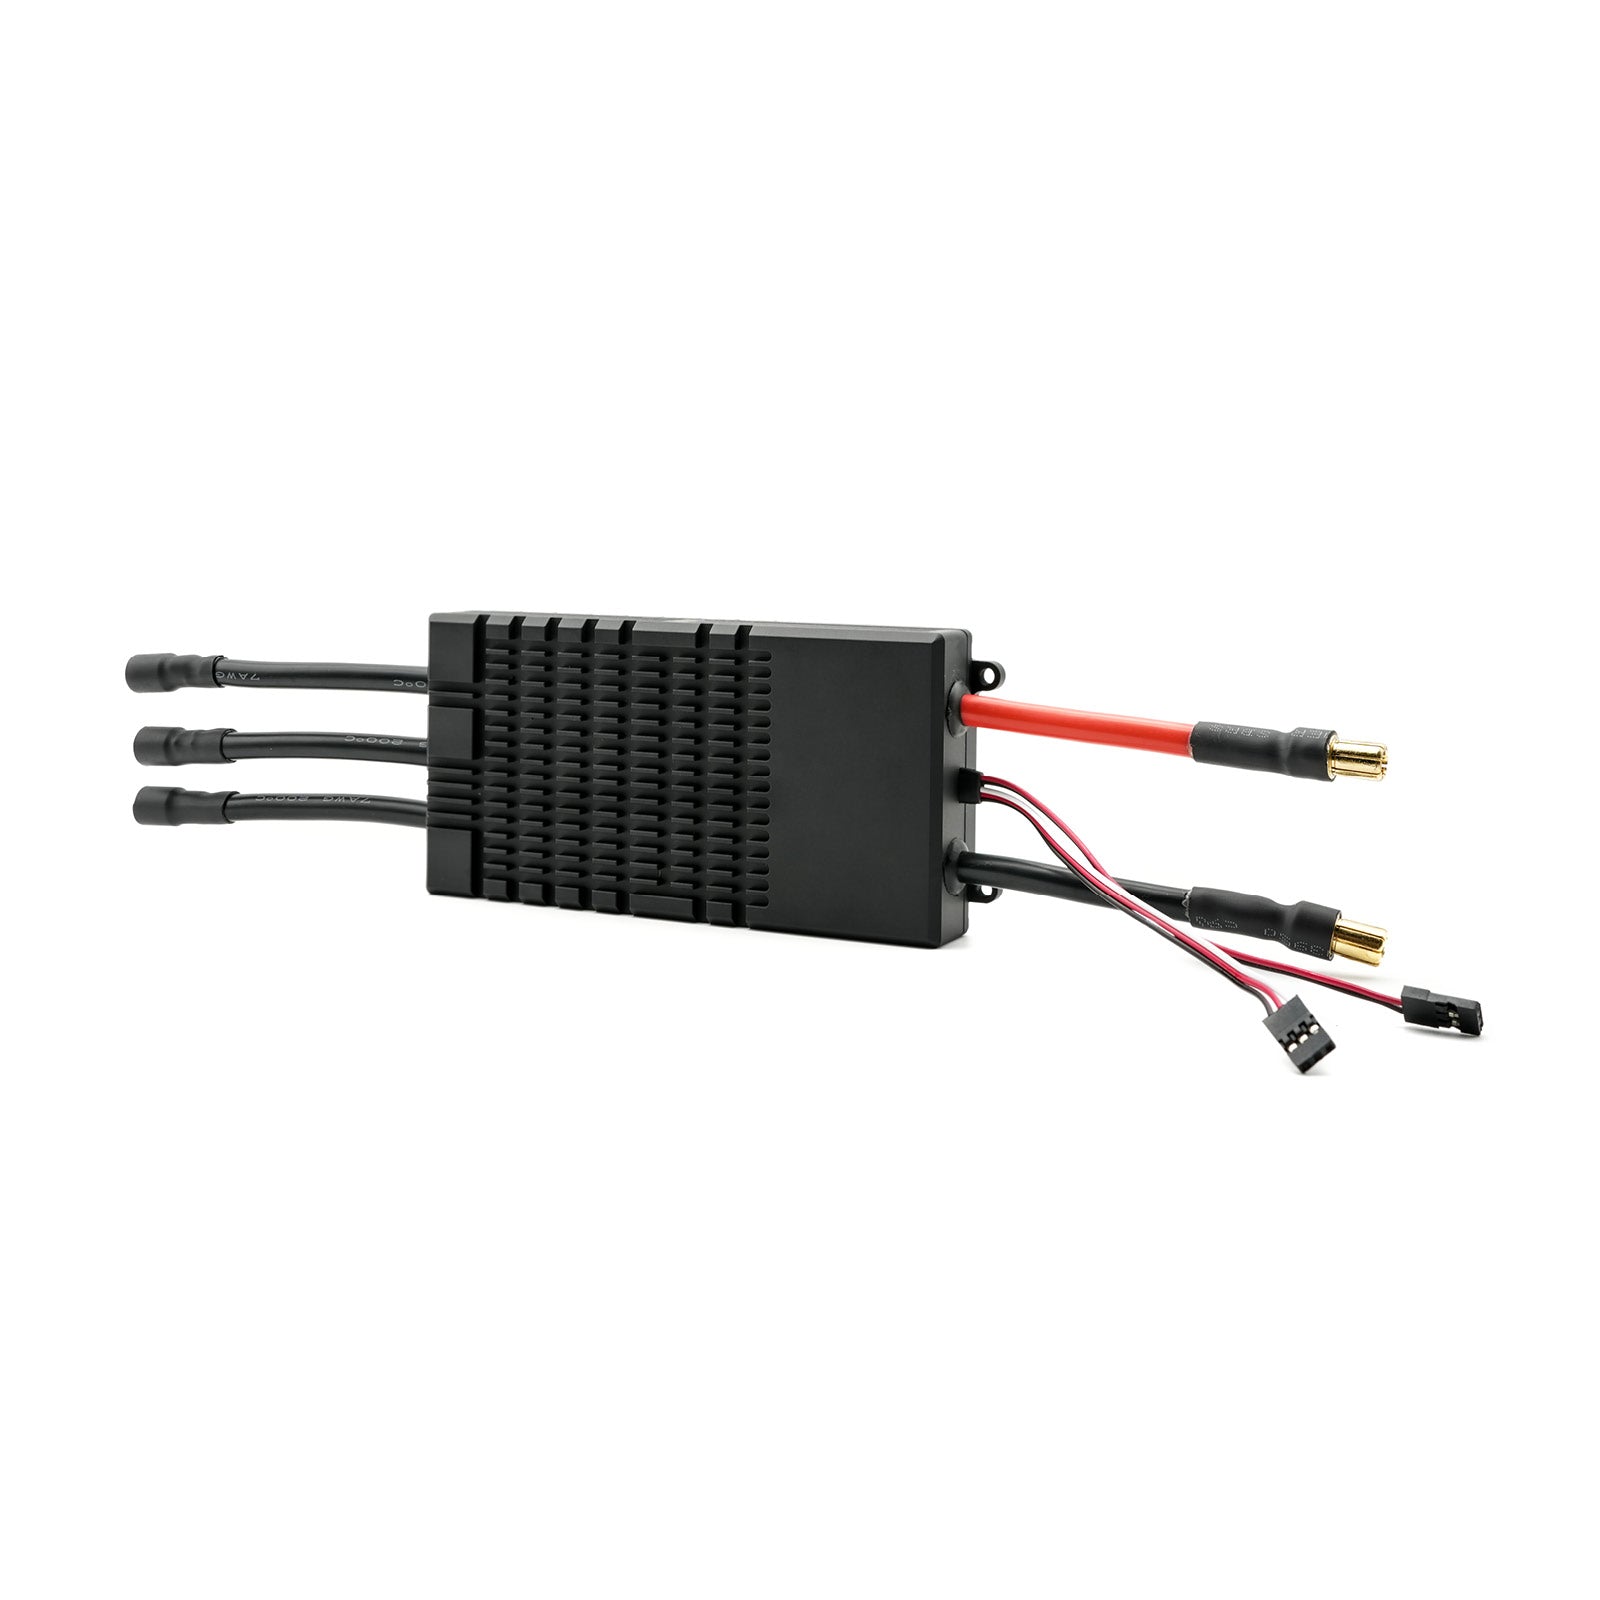 Furious Motor 24S 150A High Compatibility Motor Controller for Multi Rotor Drone